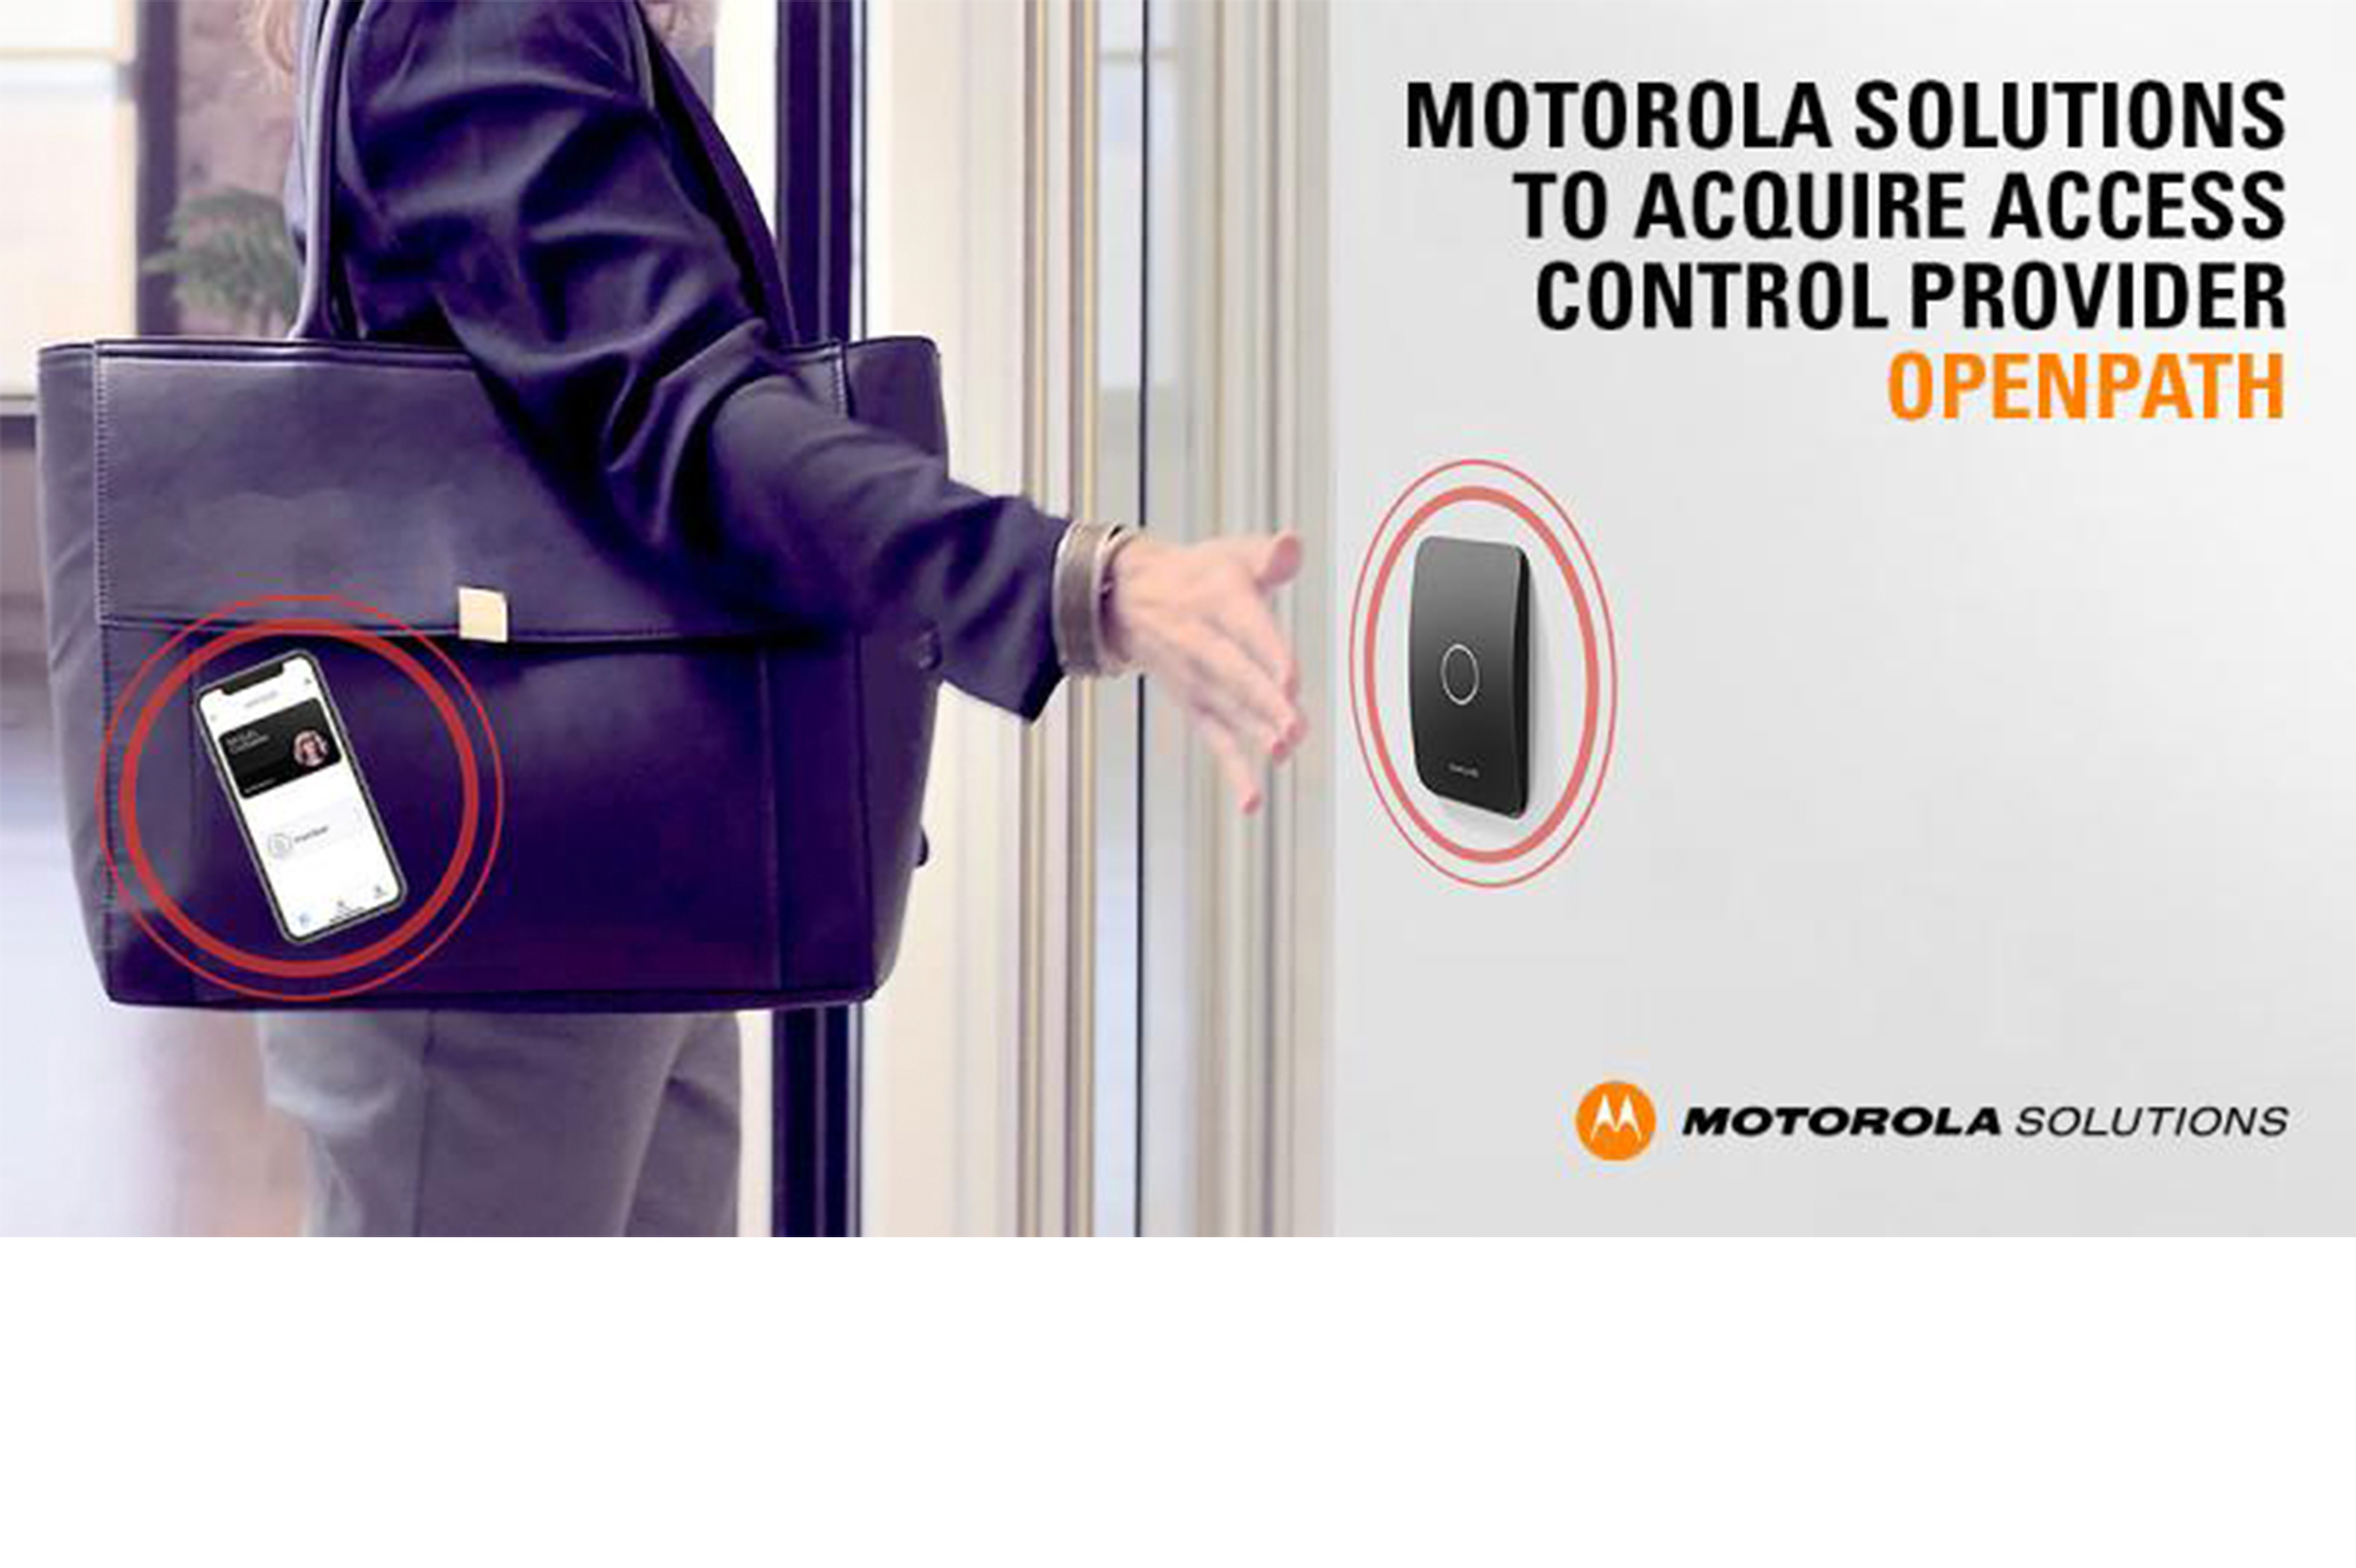 Motorola Solutions to Acquire Cloud-Based Mobile Access Control Provider Openpath